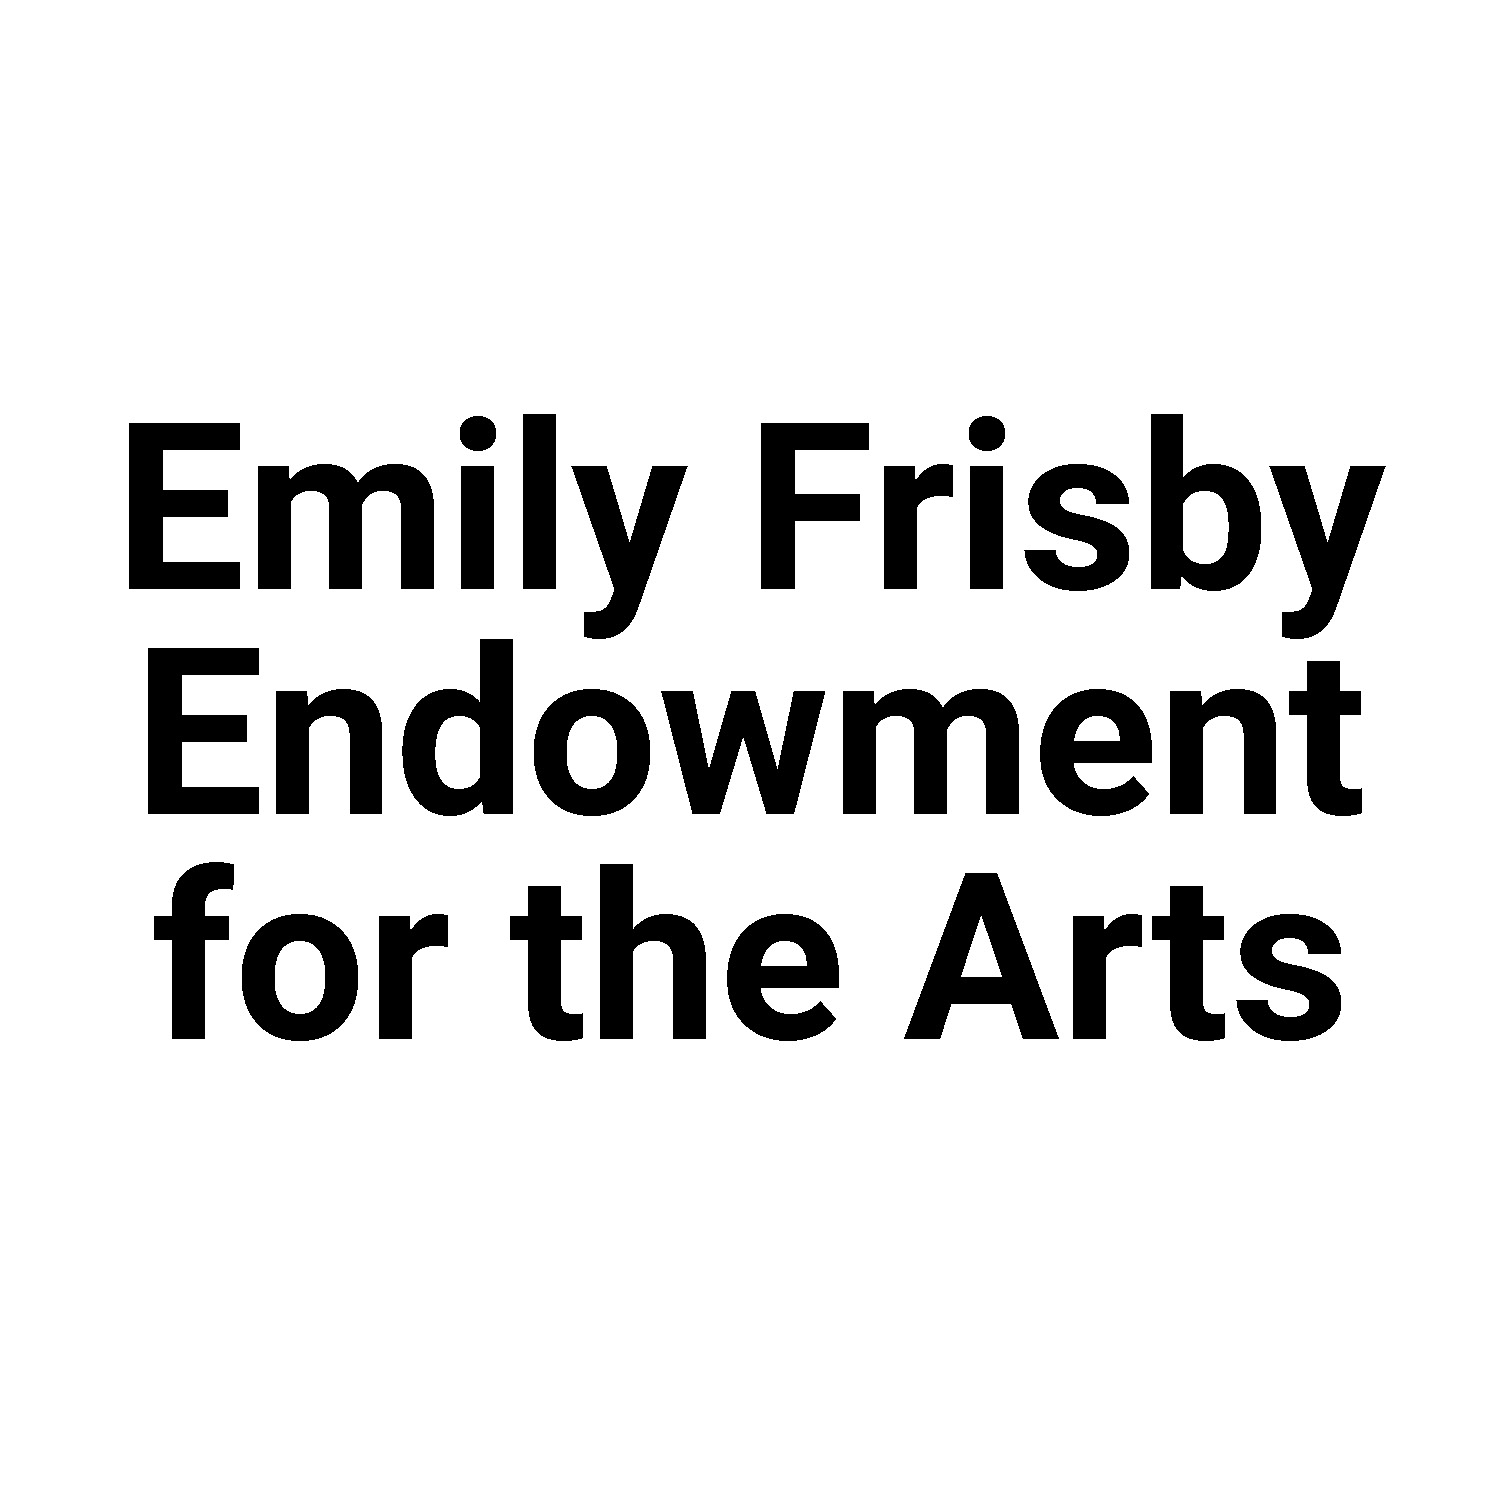 Emily Frisby Endowment for the Arts